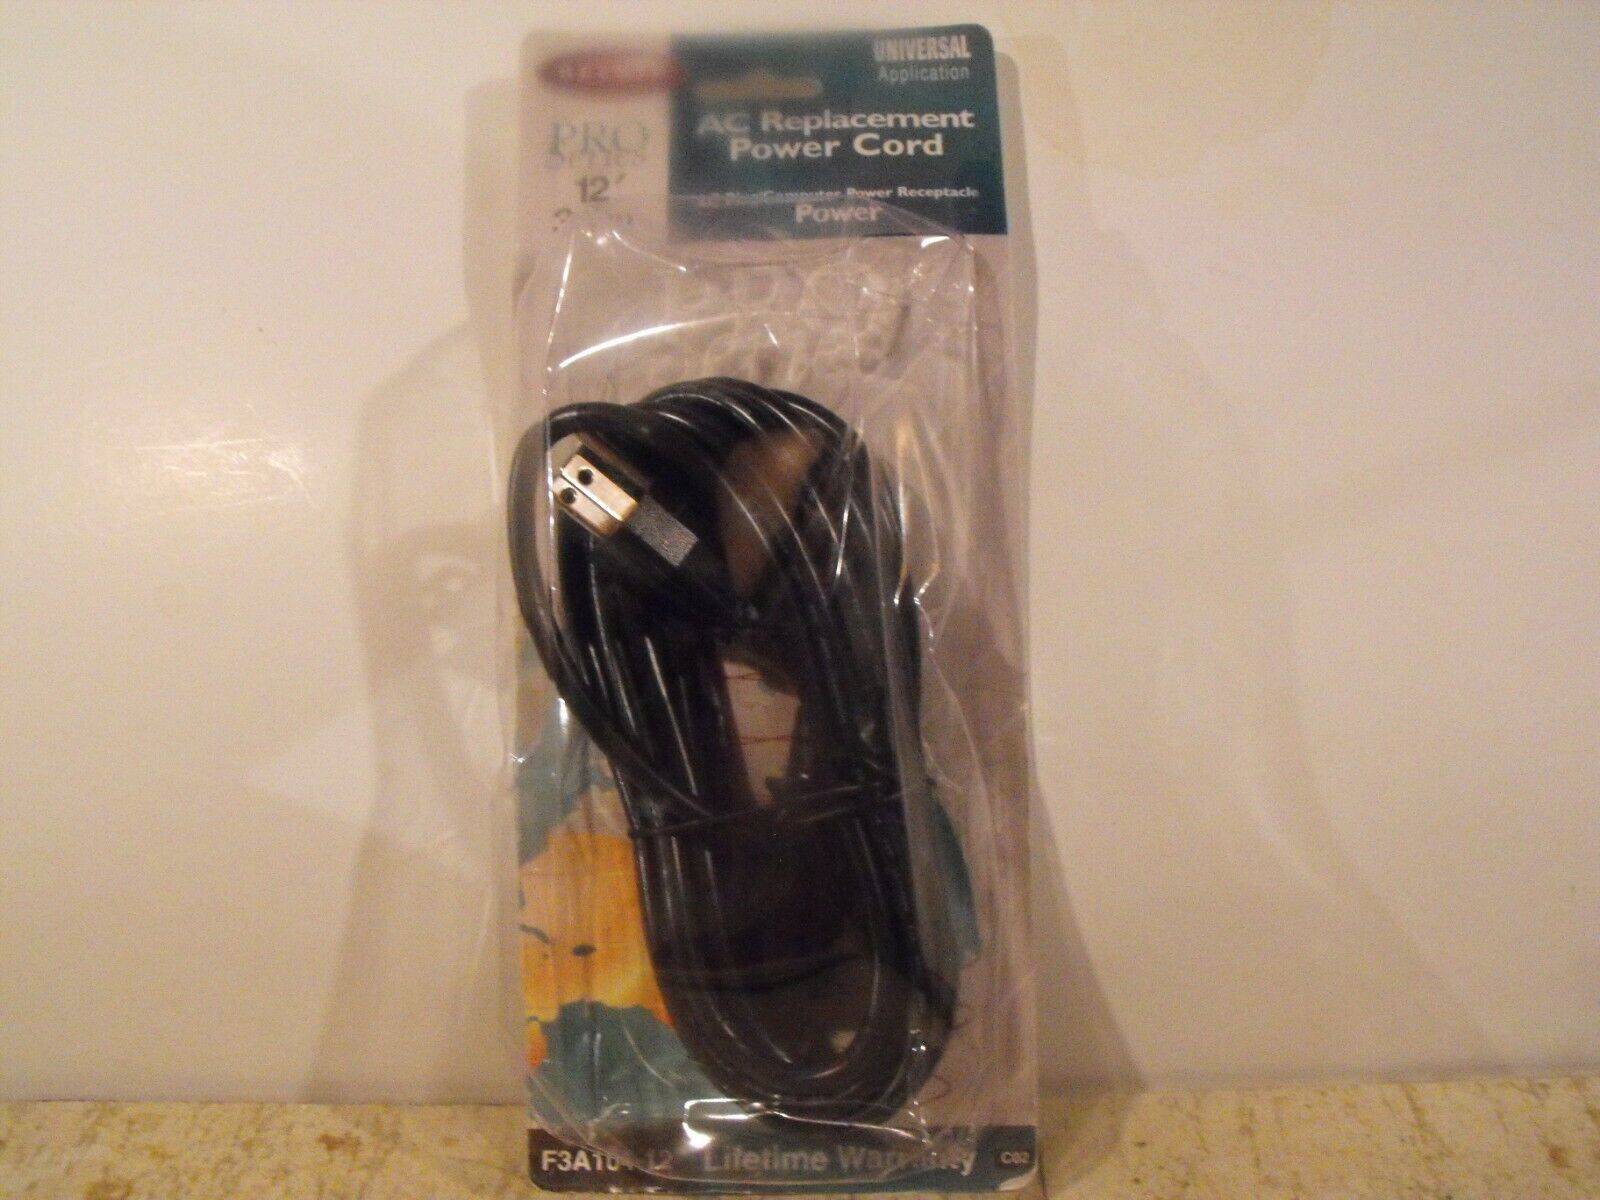 Brand New Belkin Pro Series AC Replacement Cord